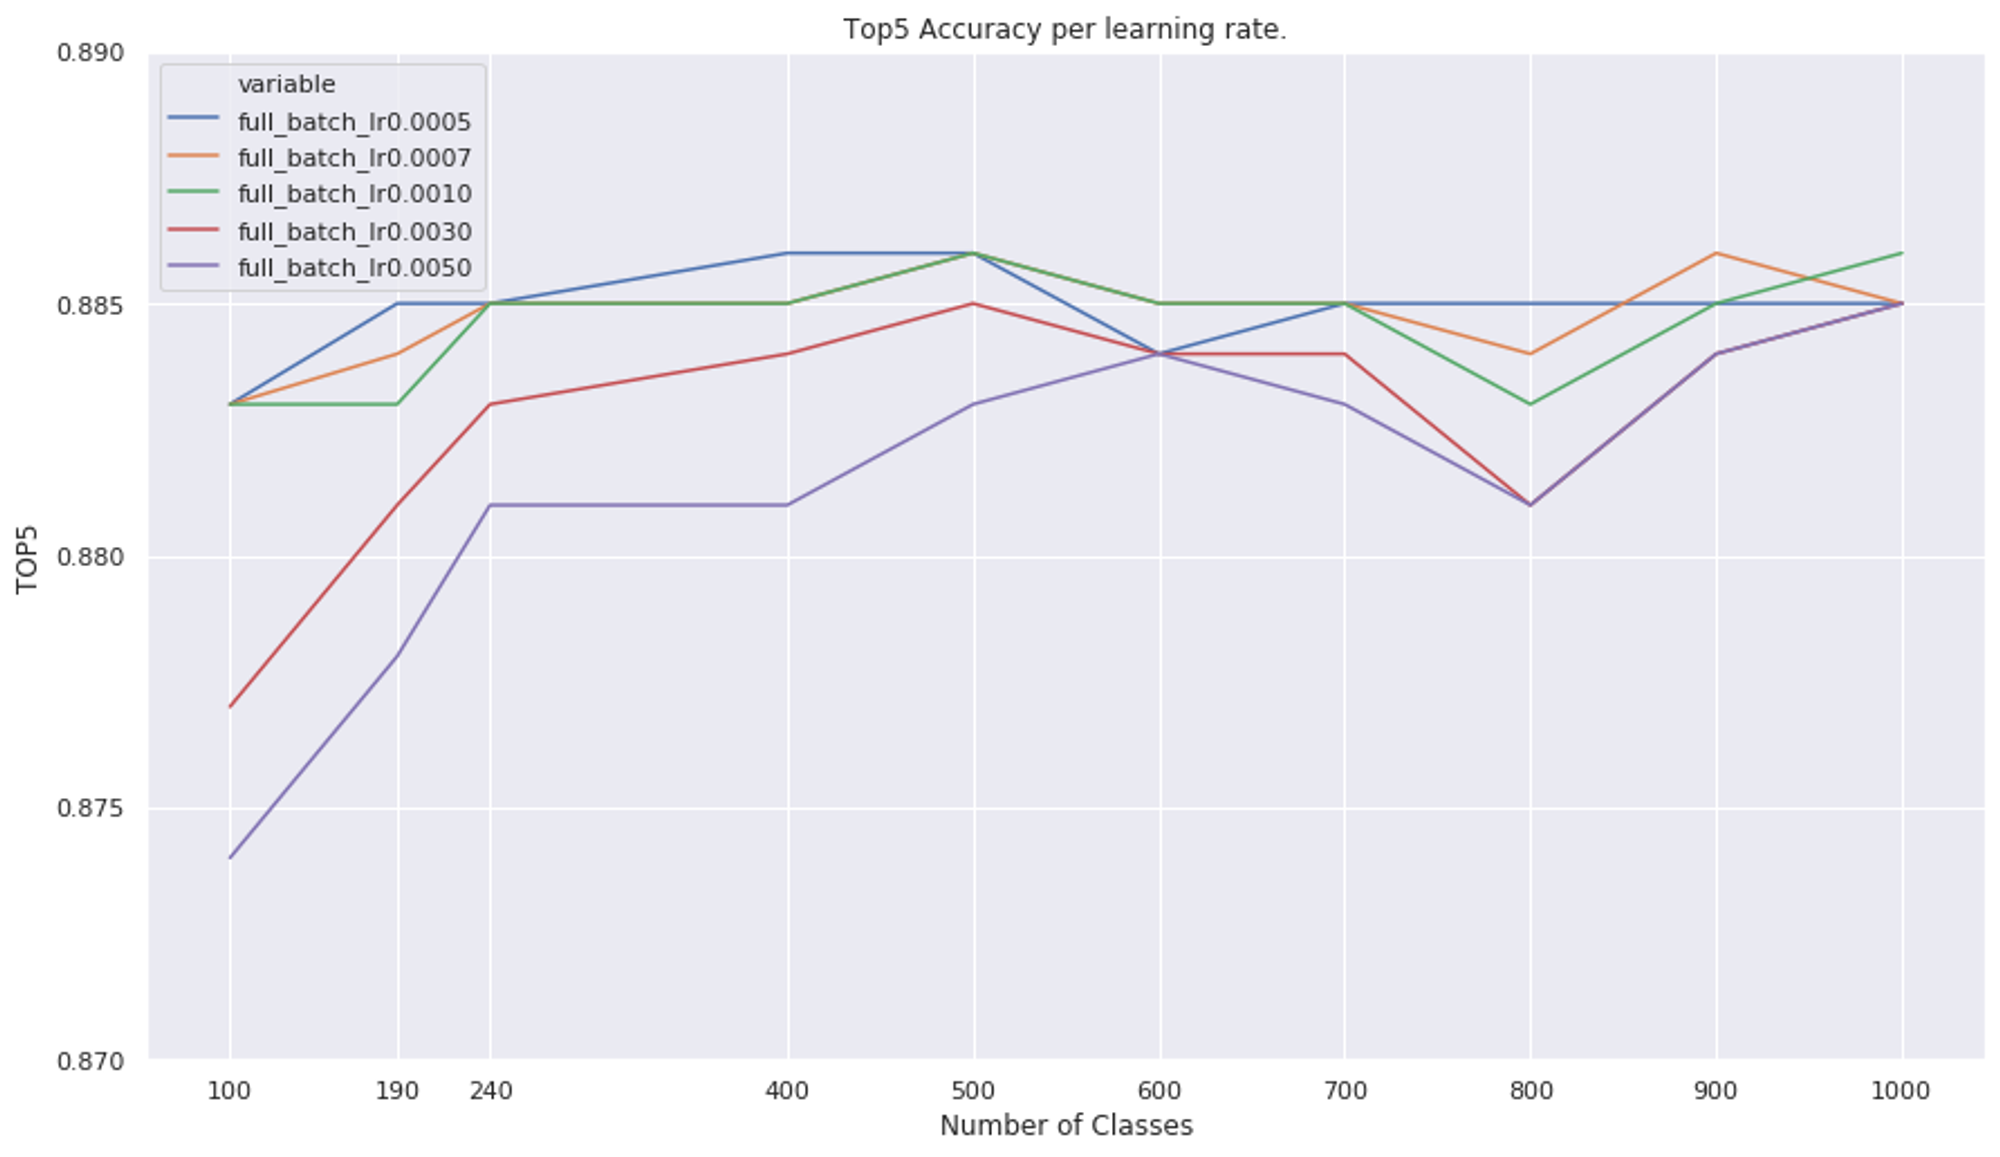 The Top 5 accuracy by number of classes in the training set